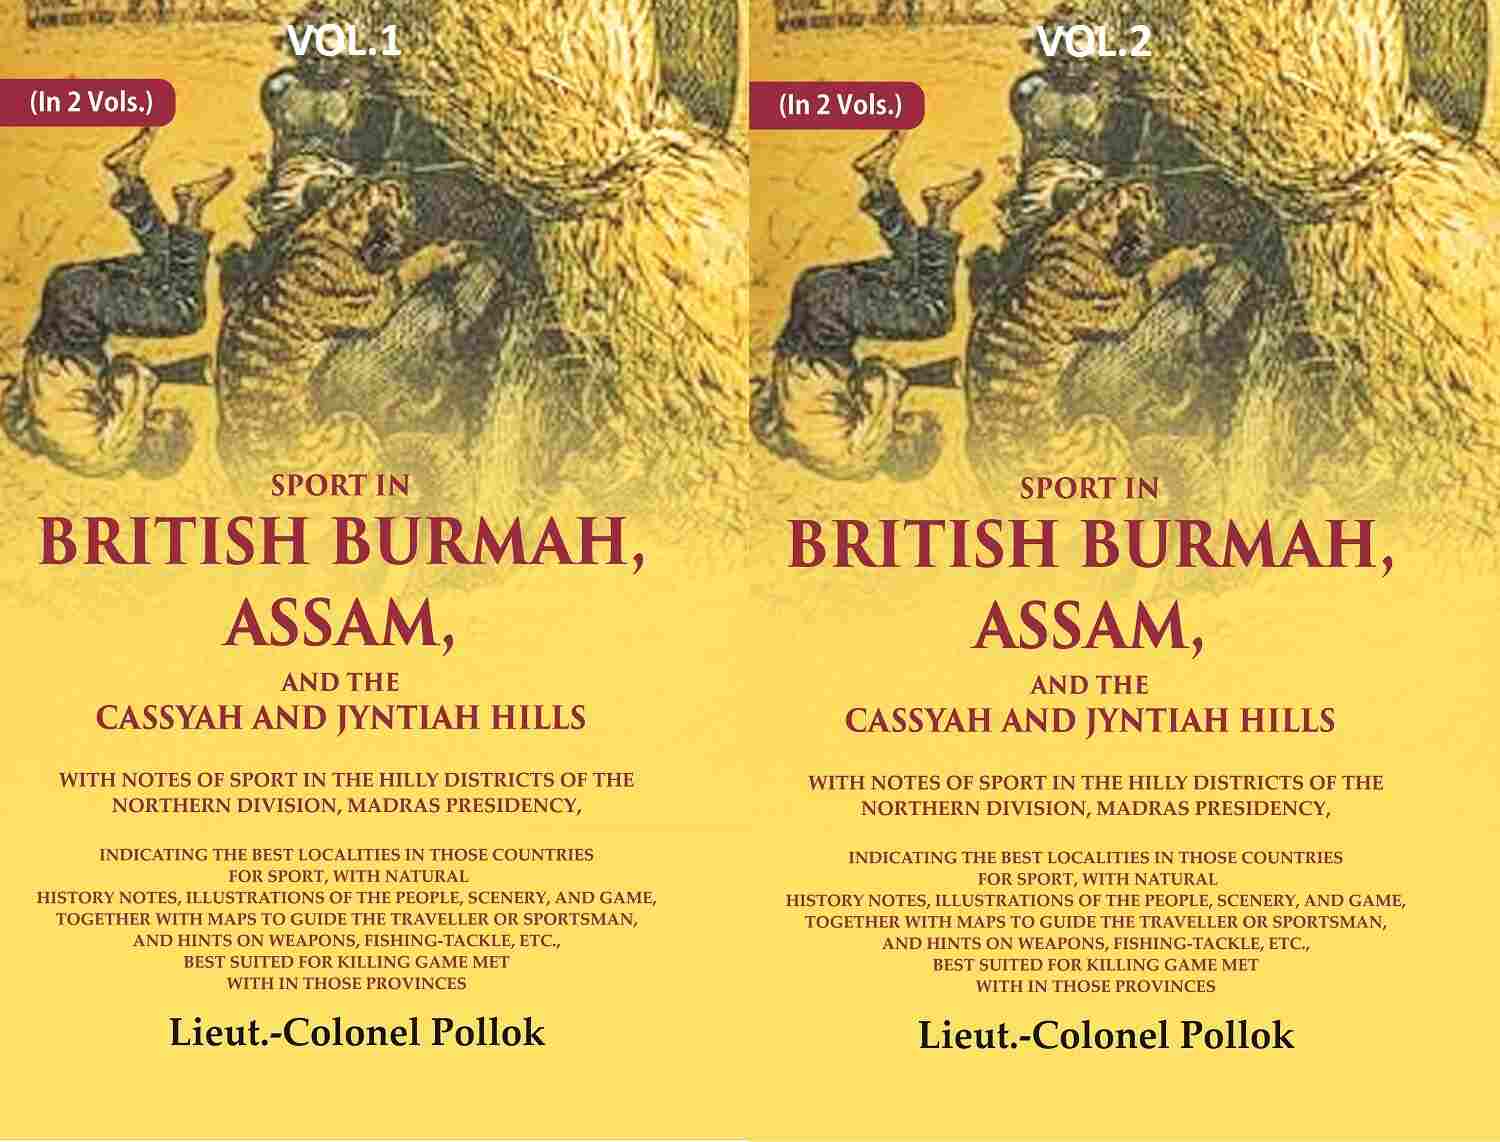 Sport in British Burmah, Assam, and the Cassyah and Jyntiah hills: With notes of sport in the hilly districts of the northern division, Madras Presidency, indicating the best localities in those countries for sport, with natural history notes, illustratio